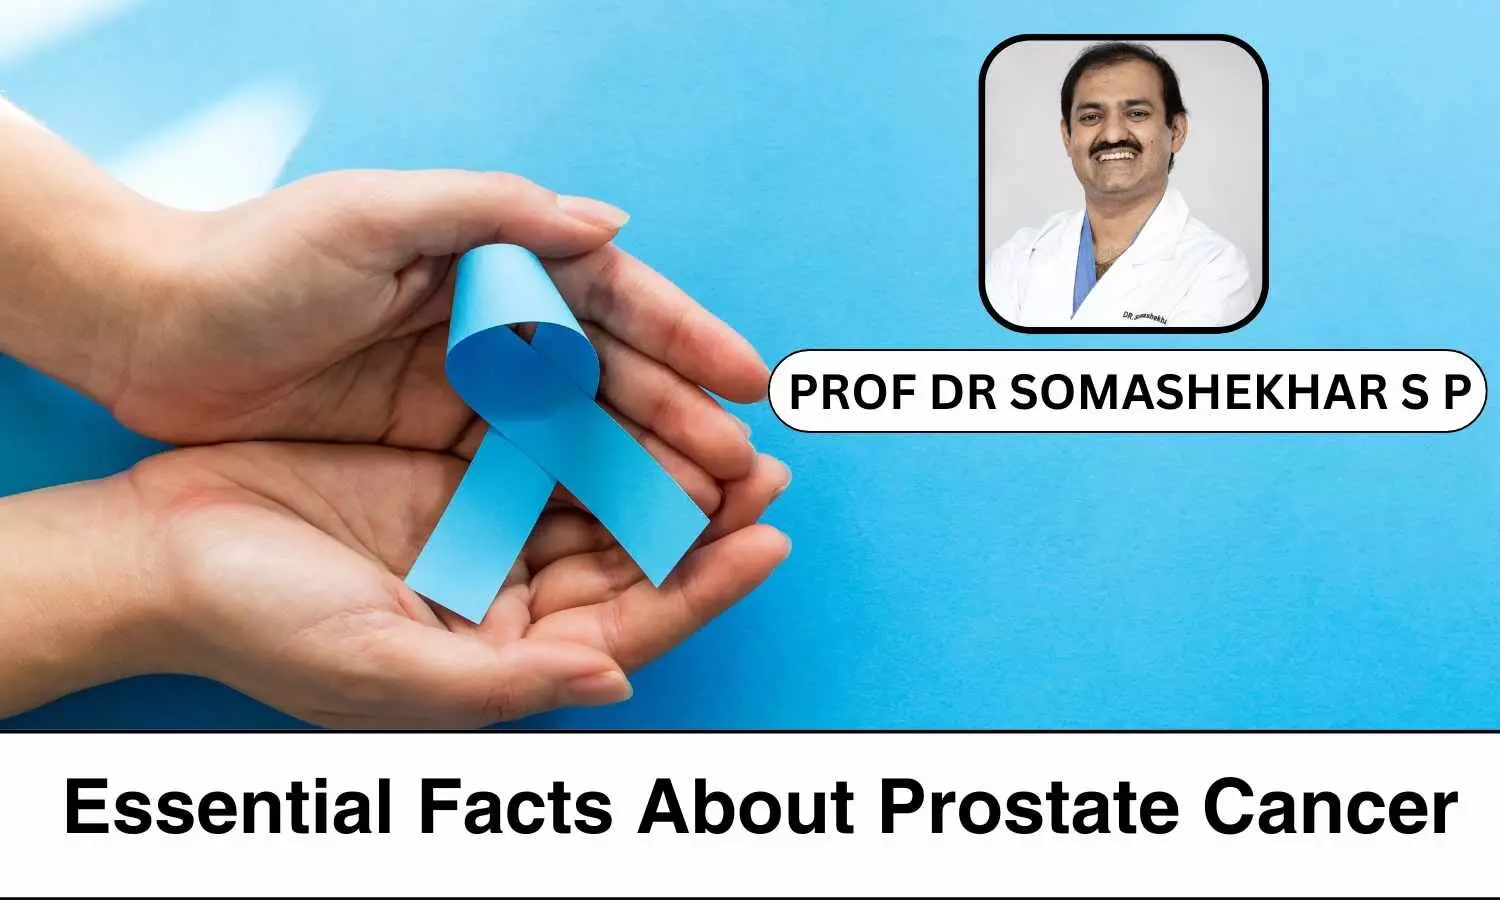 10 Essential Facts You Need to Know About Prostate Cancer - Prof Dr Somashekhar S P